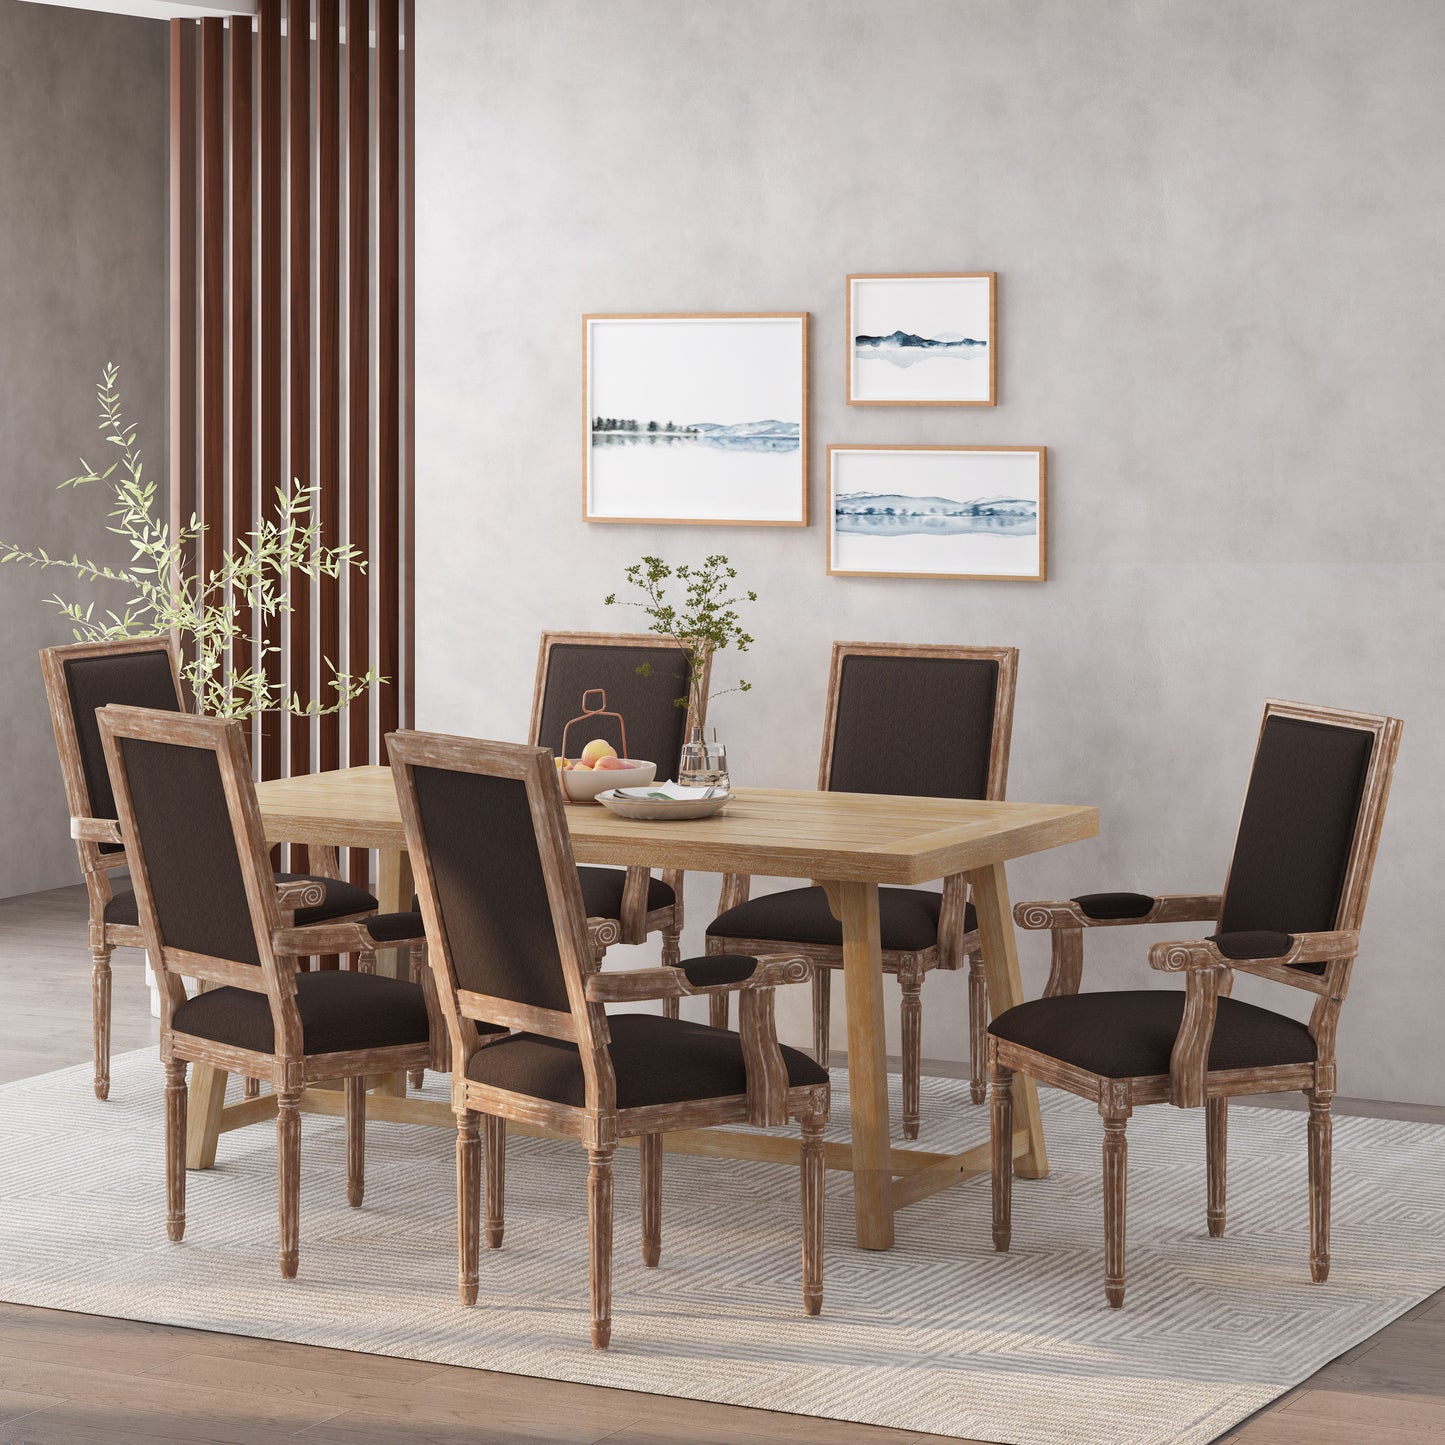 Ashlyn French Country Fabric Upholstered Wood Dining Chairs, Set of 6